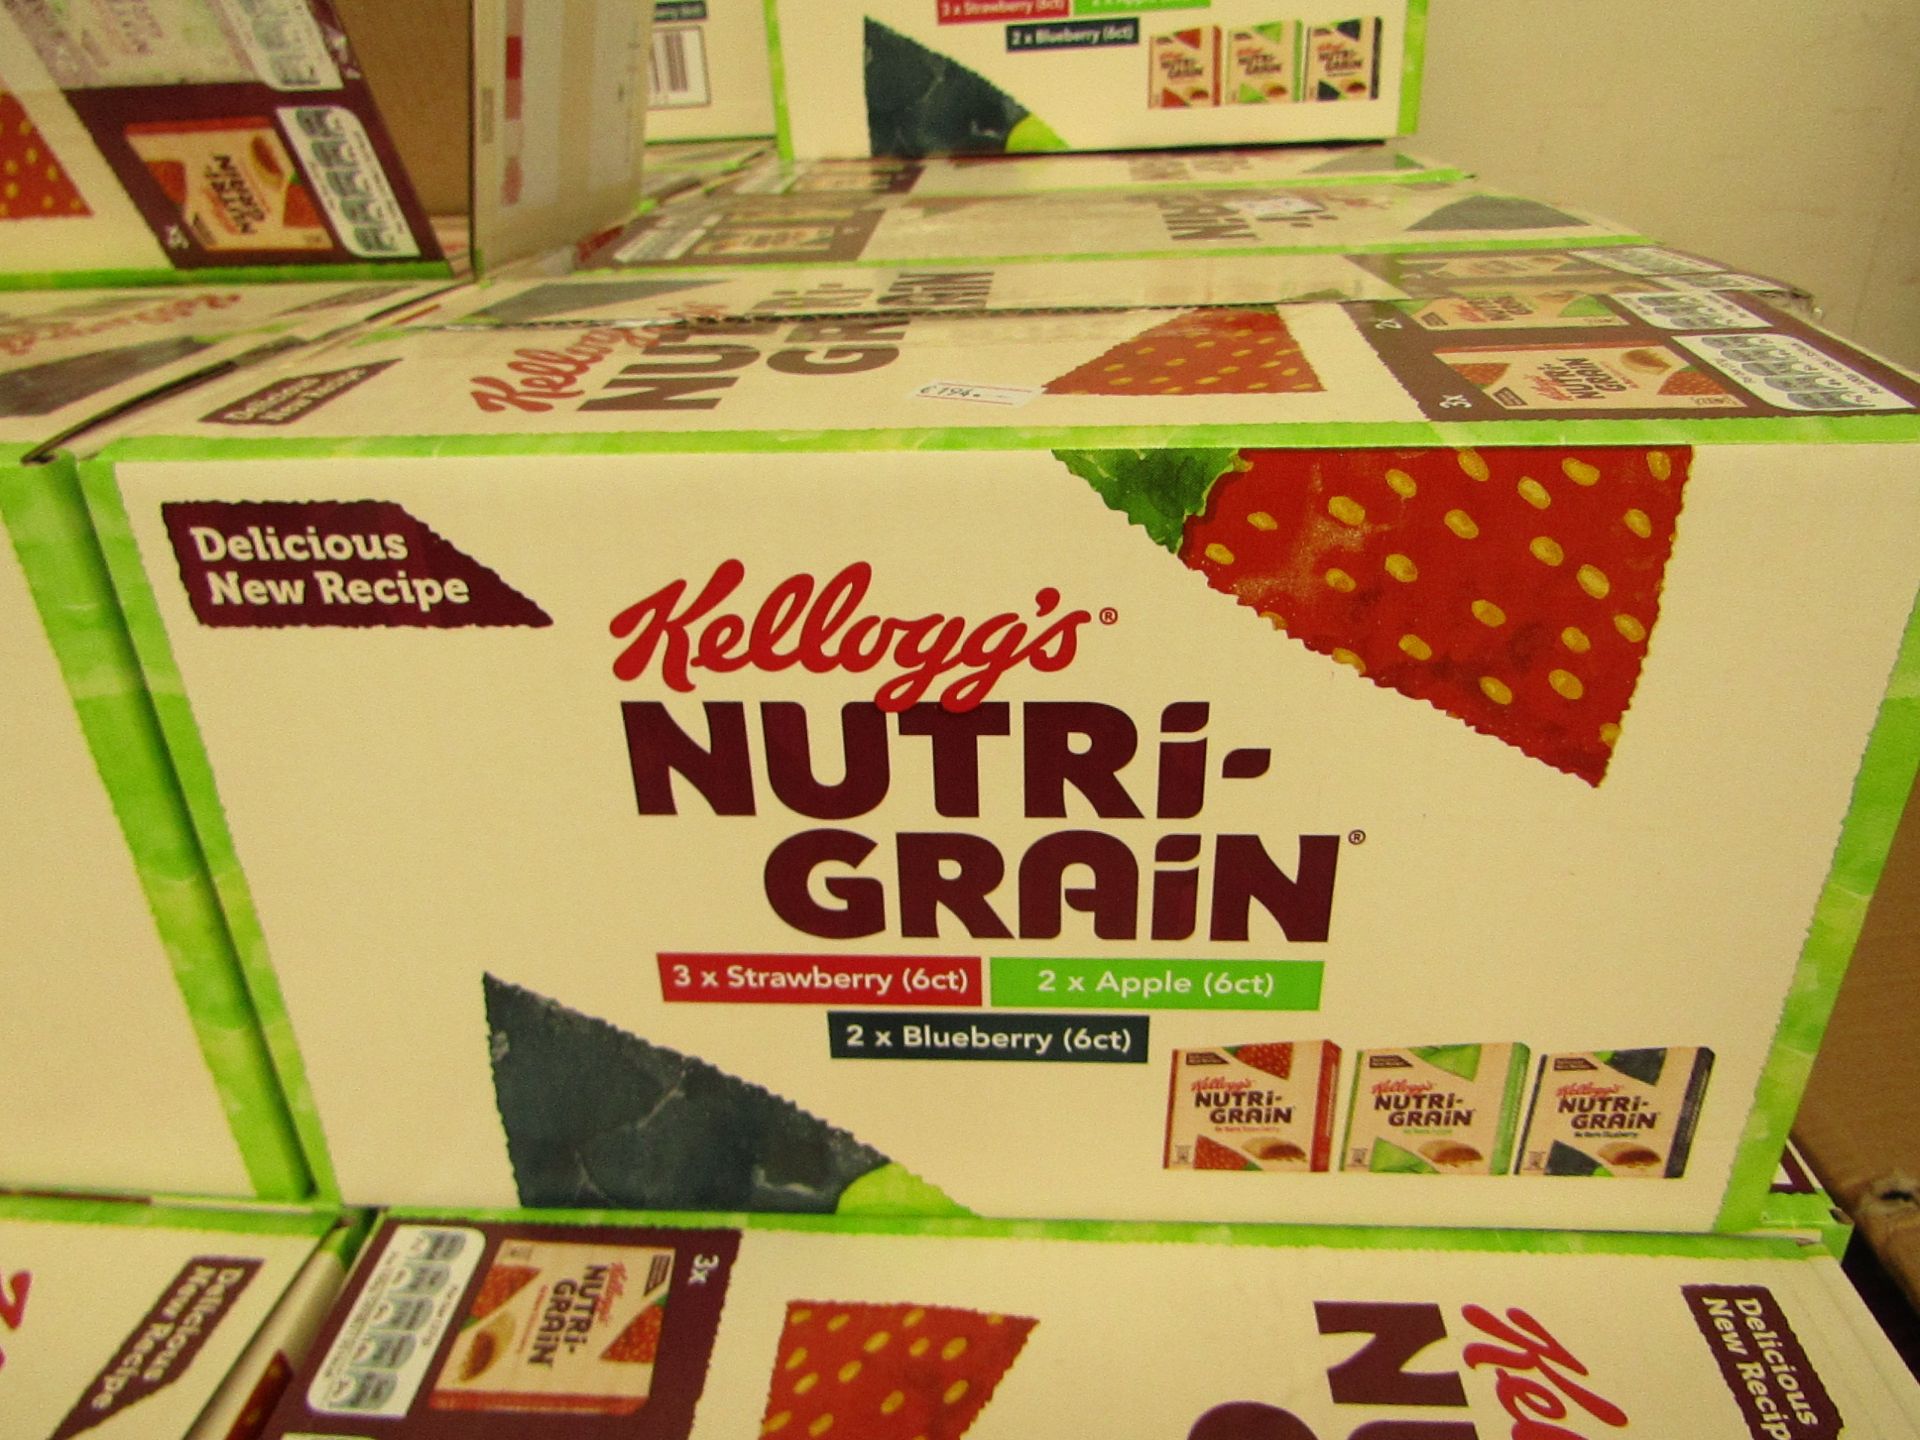 2 Boxes of 42 Kelloggs Nutri grain Bars. BB 08/08/20. Mixed Flavours.